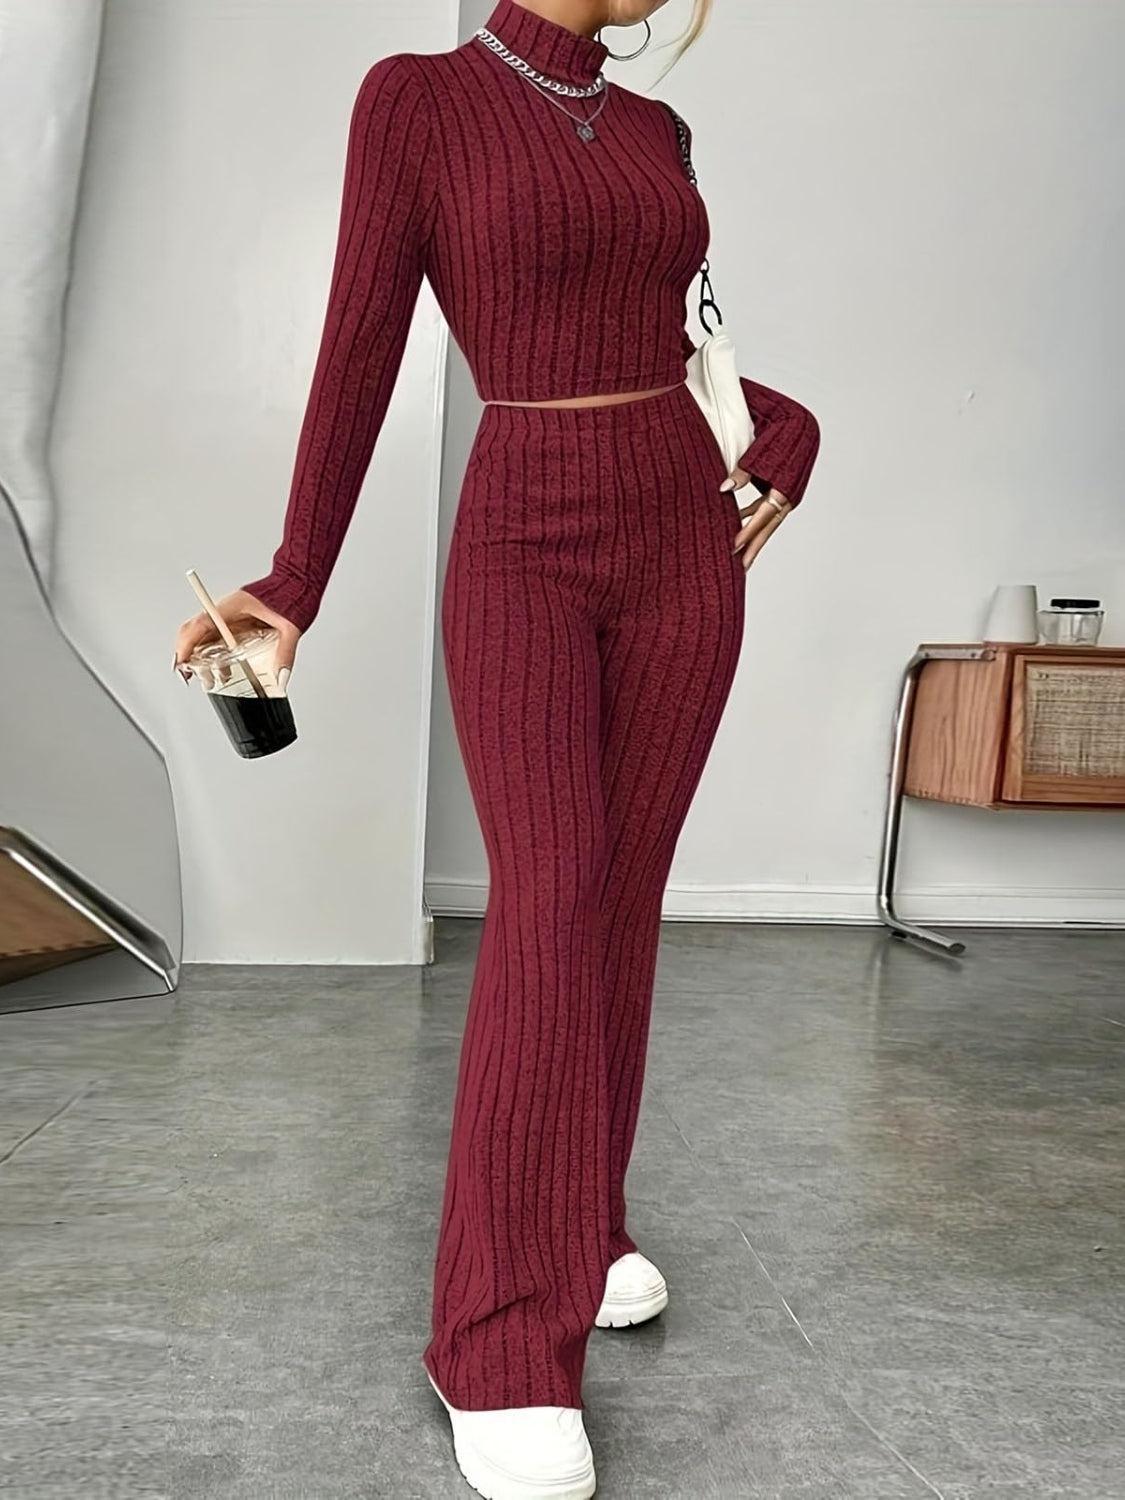 a woman in a red sweater and matching pants